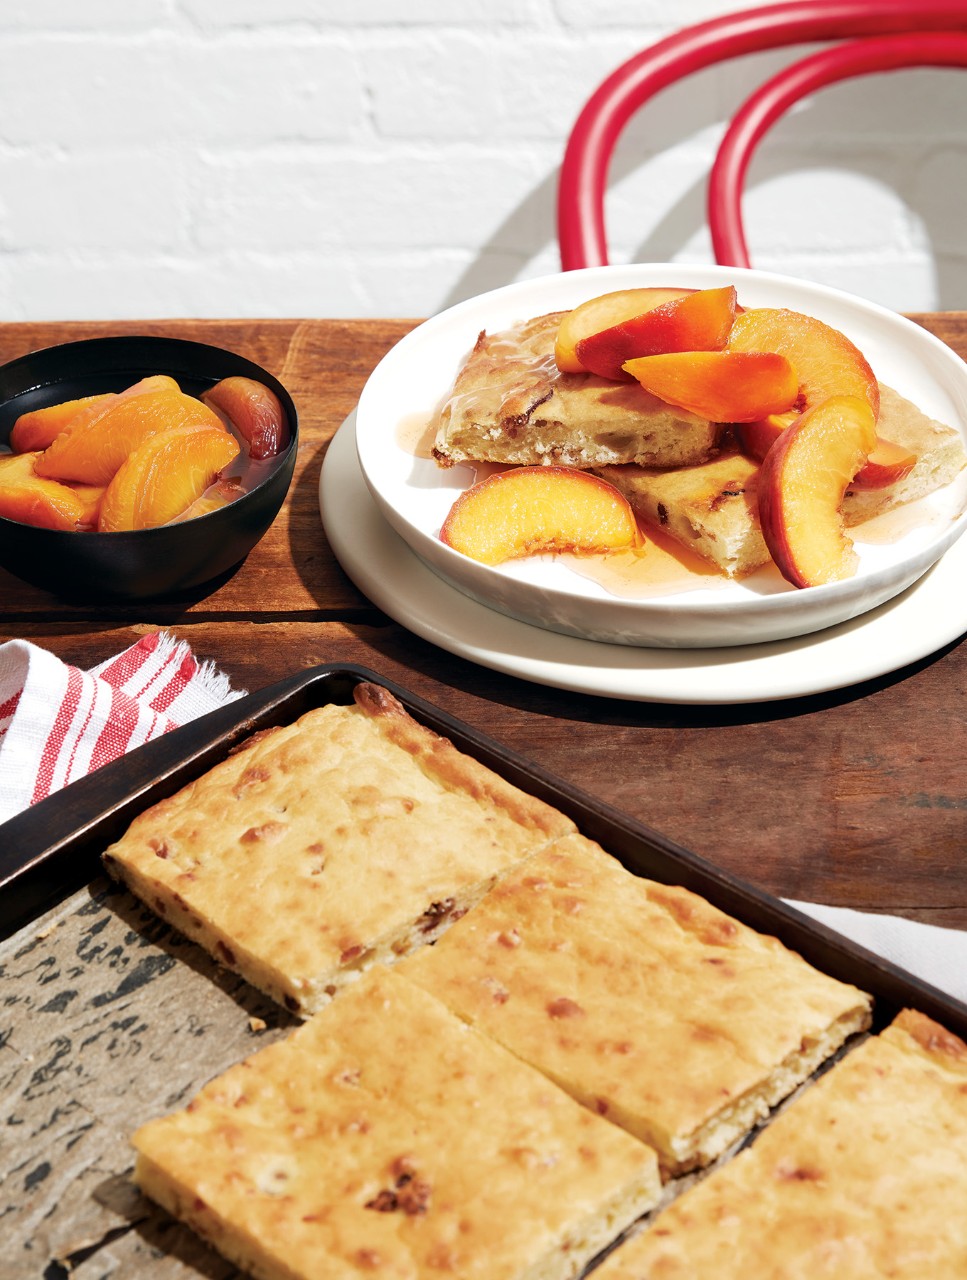 Tray-Baked Buttery Pancakes With Berries & Spiced Peaches